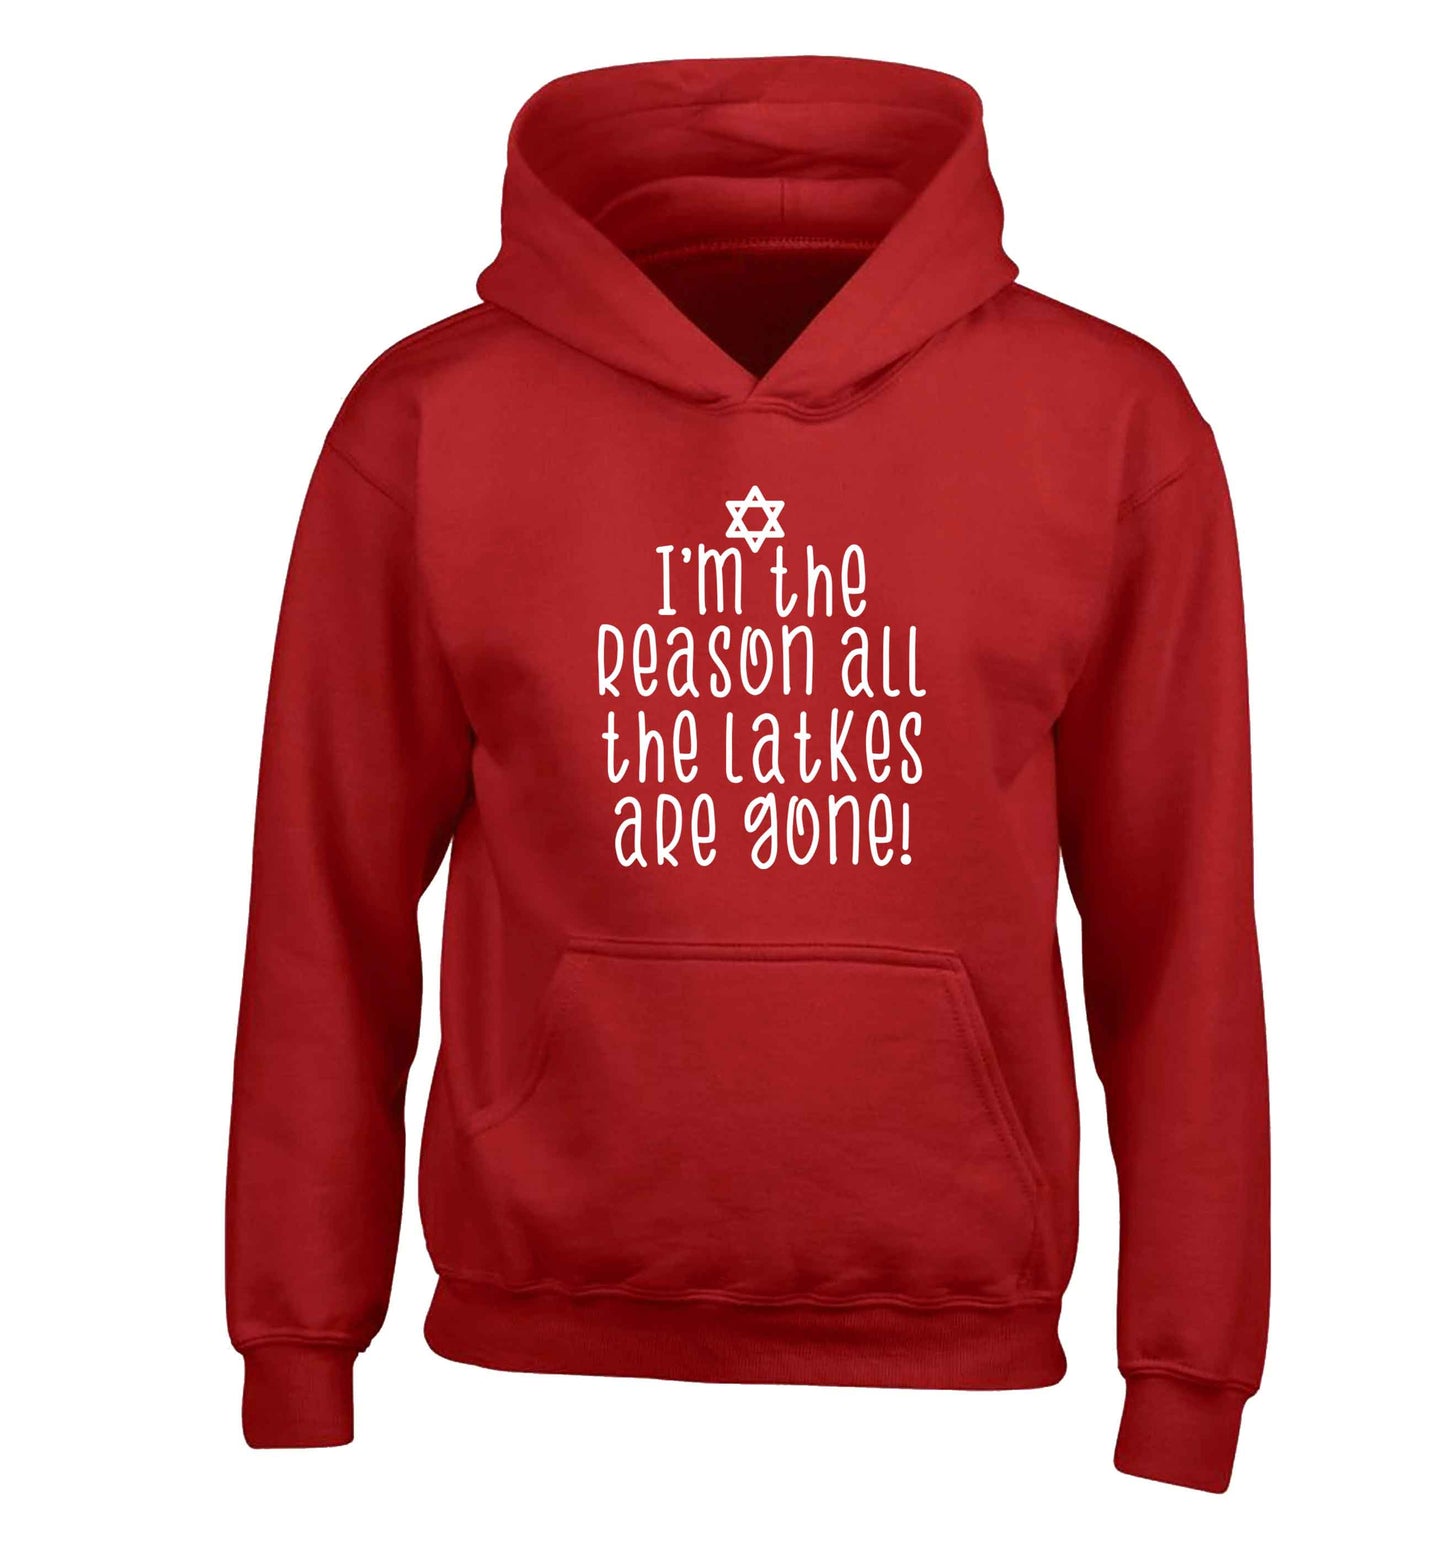 I'm the reason all the latkes are gone children's red hoodie 12-13 Years